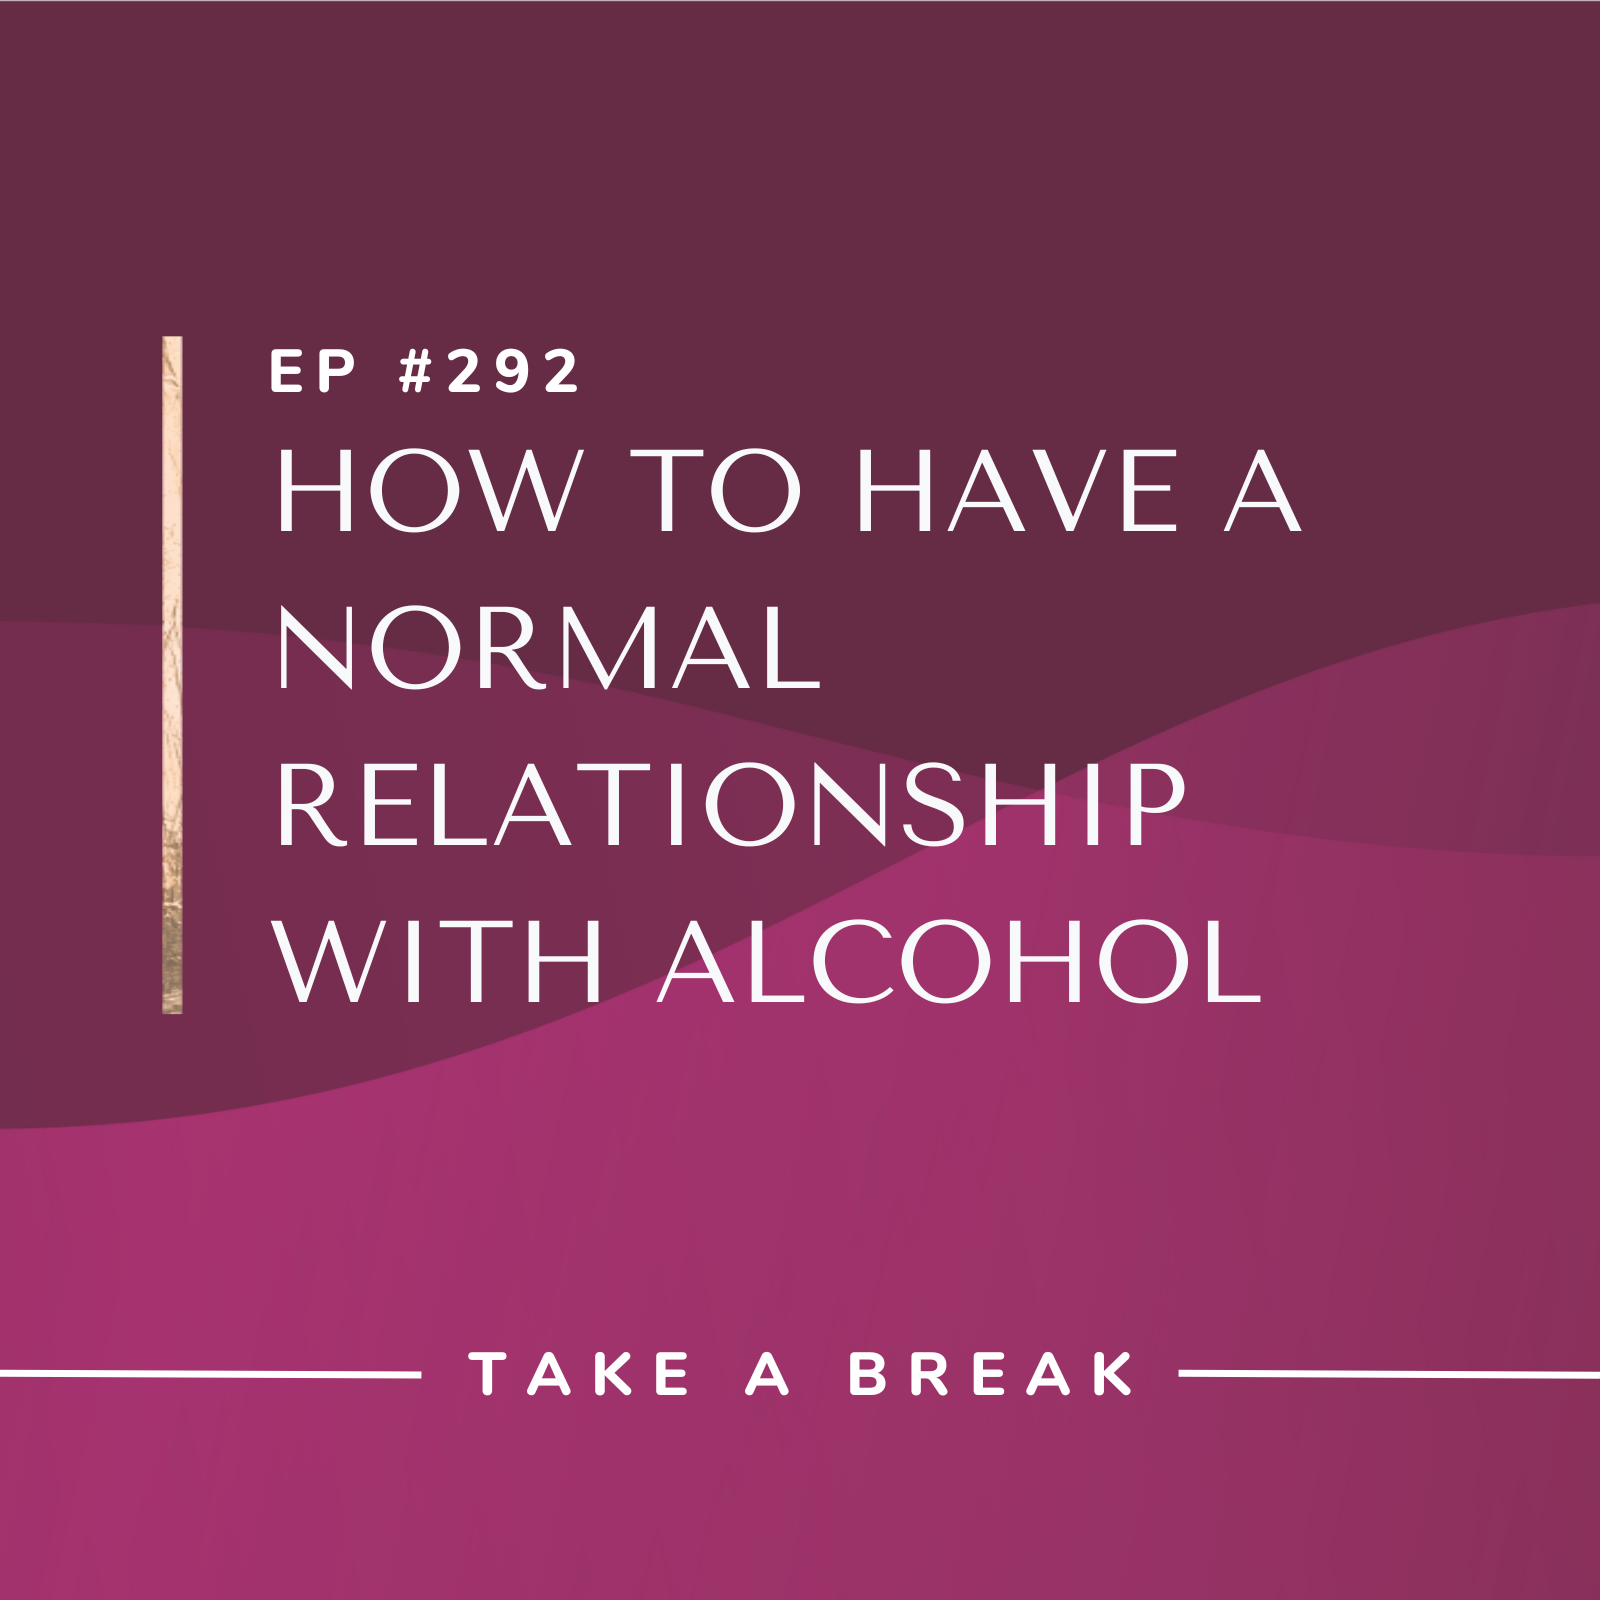 Take A Break from Drinking | How to Have a Normal Relationship with Alcohol